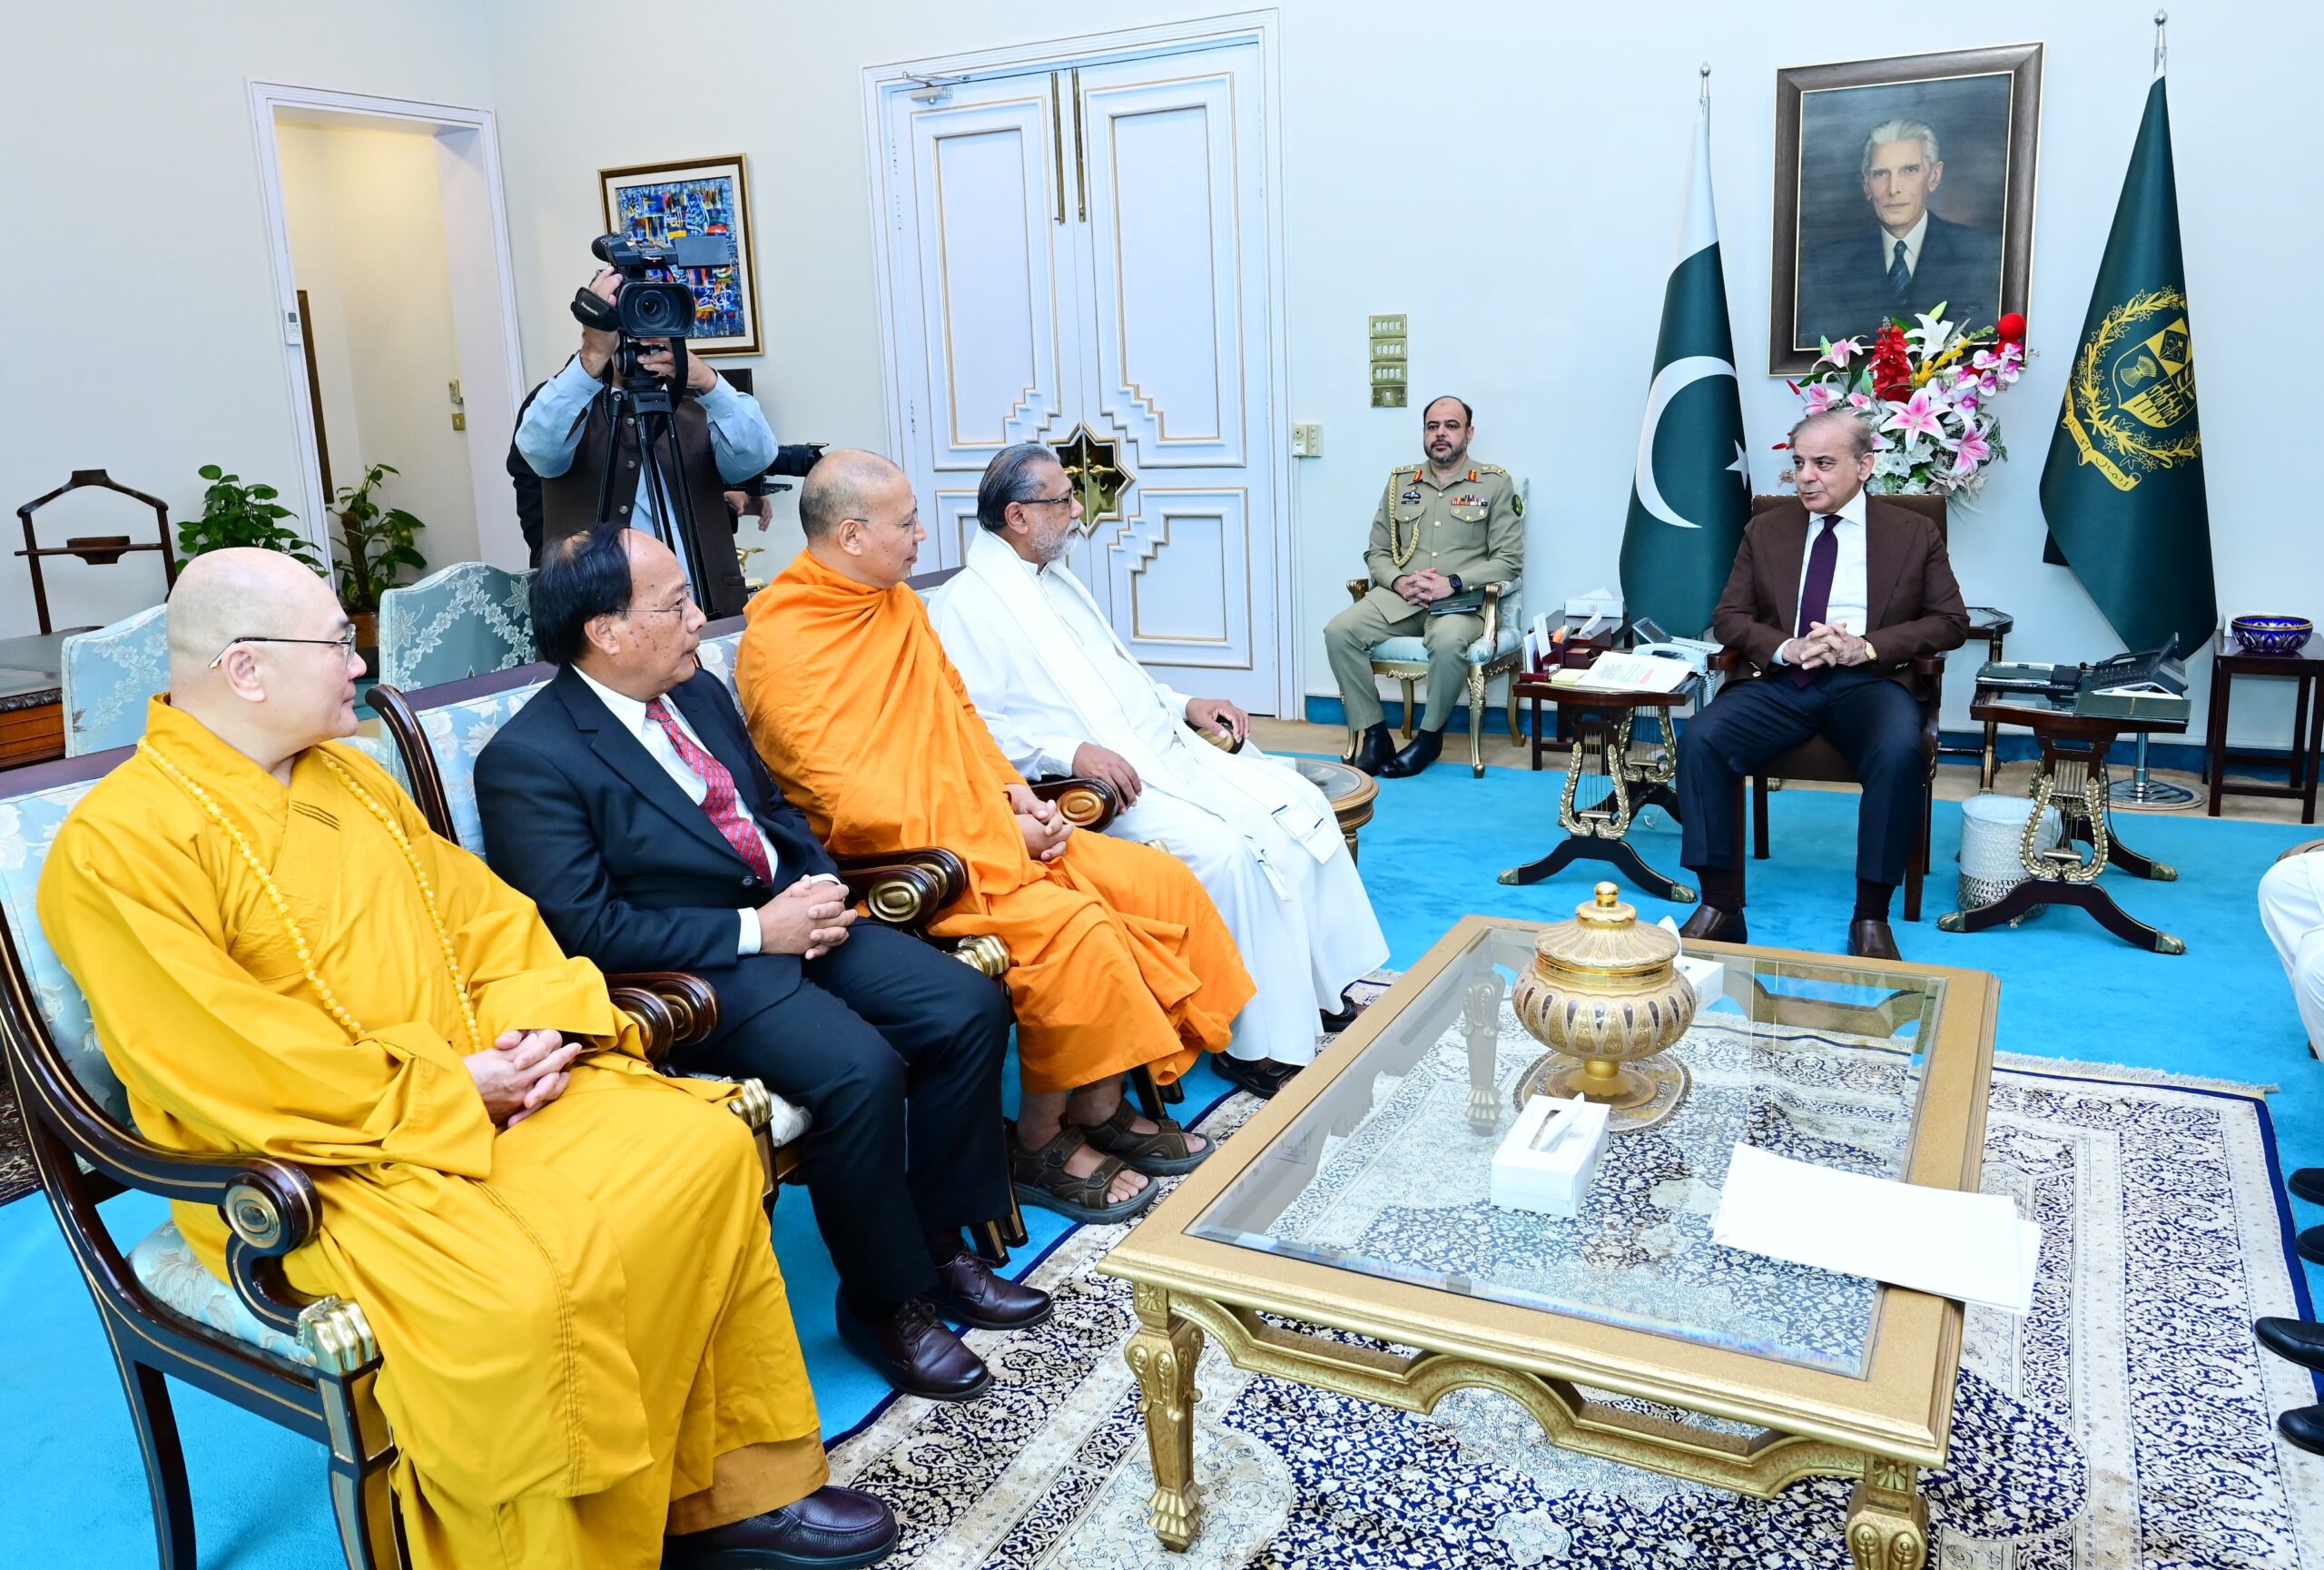 Sri Lankan, Nepali, Vietnamese and Thai Buddhist Leaders Meet with Prime Minister of Pakistan for Interfaith Dialogue - By Adnan Hameed